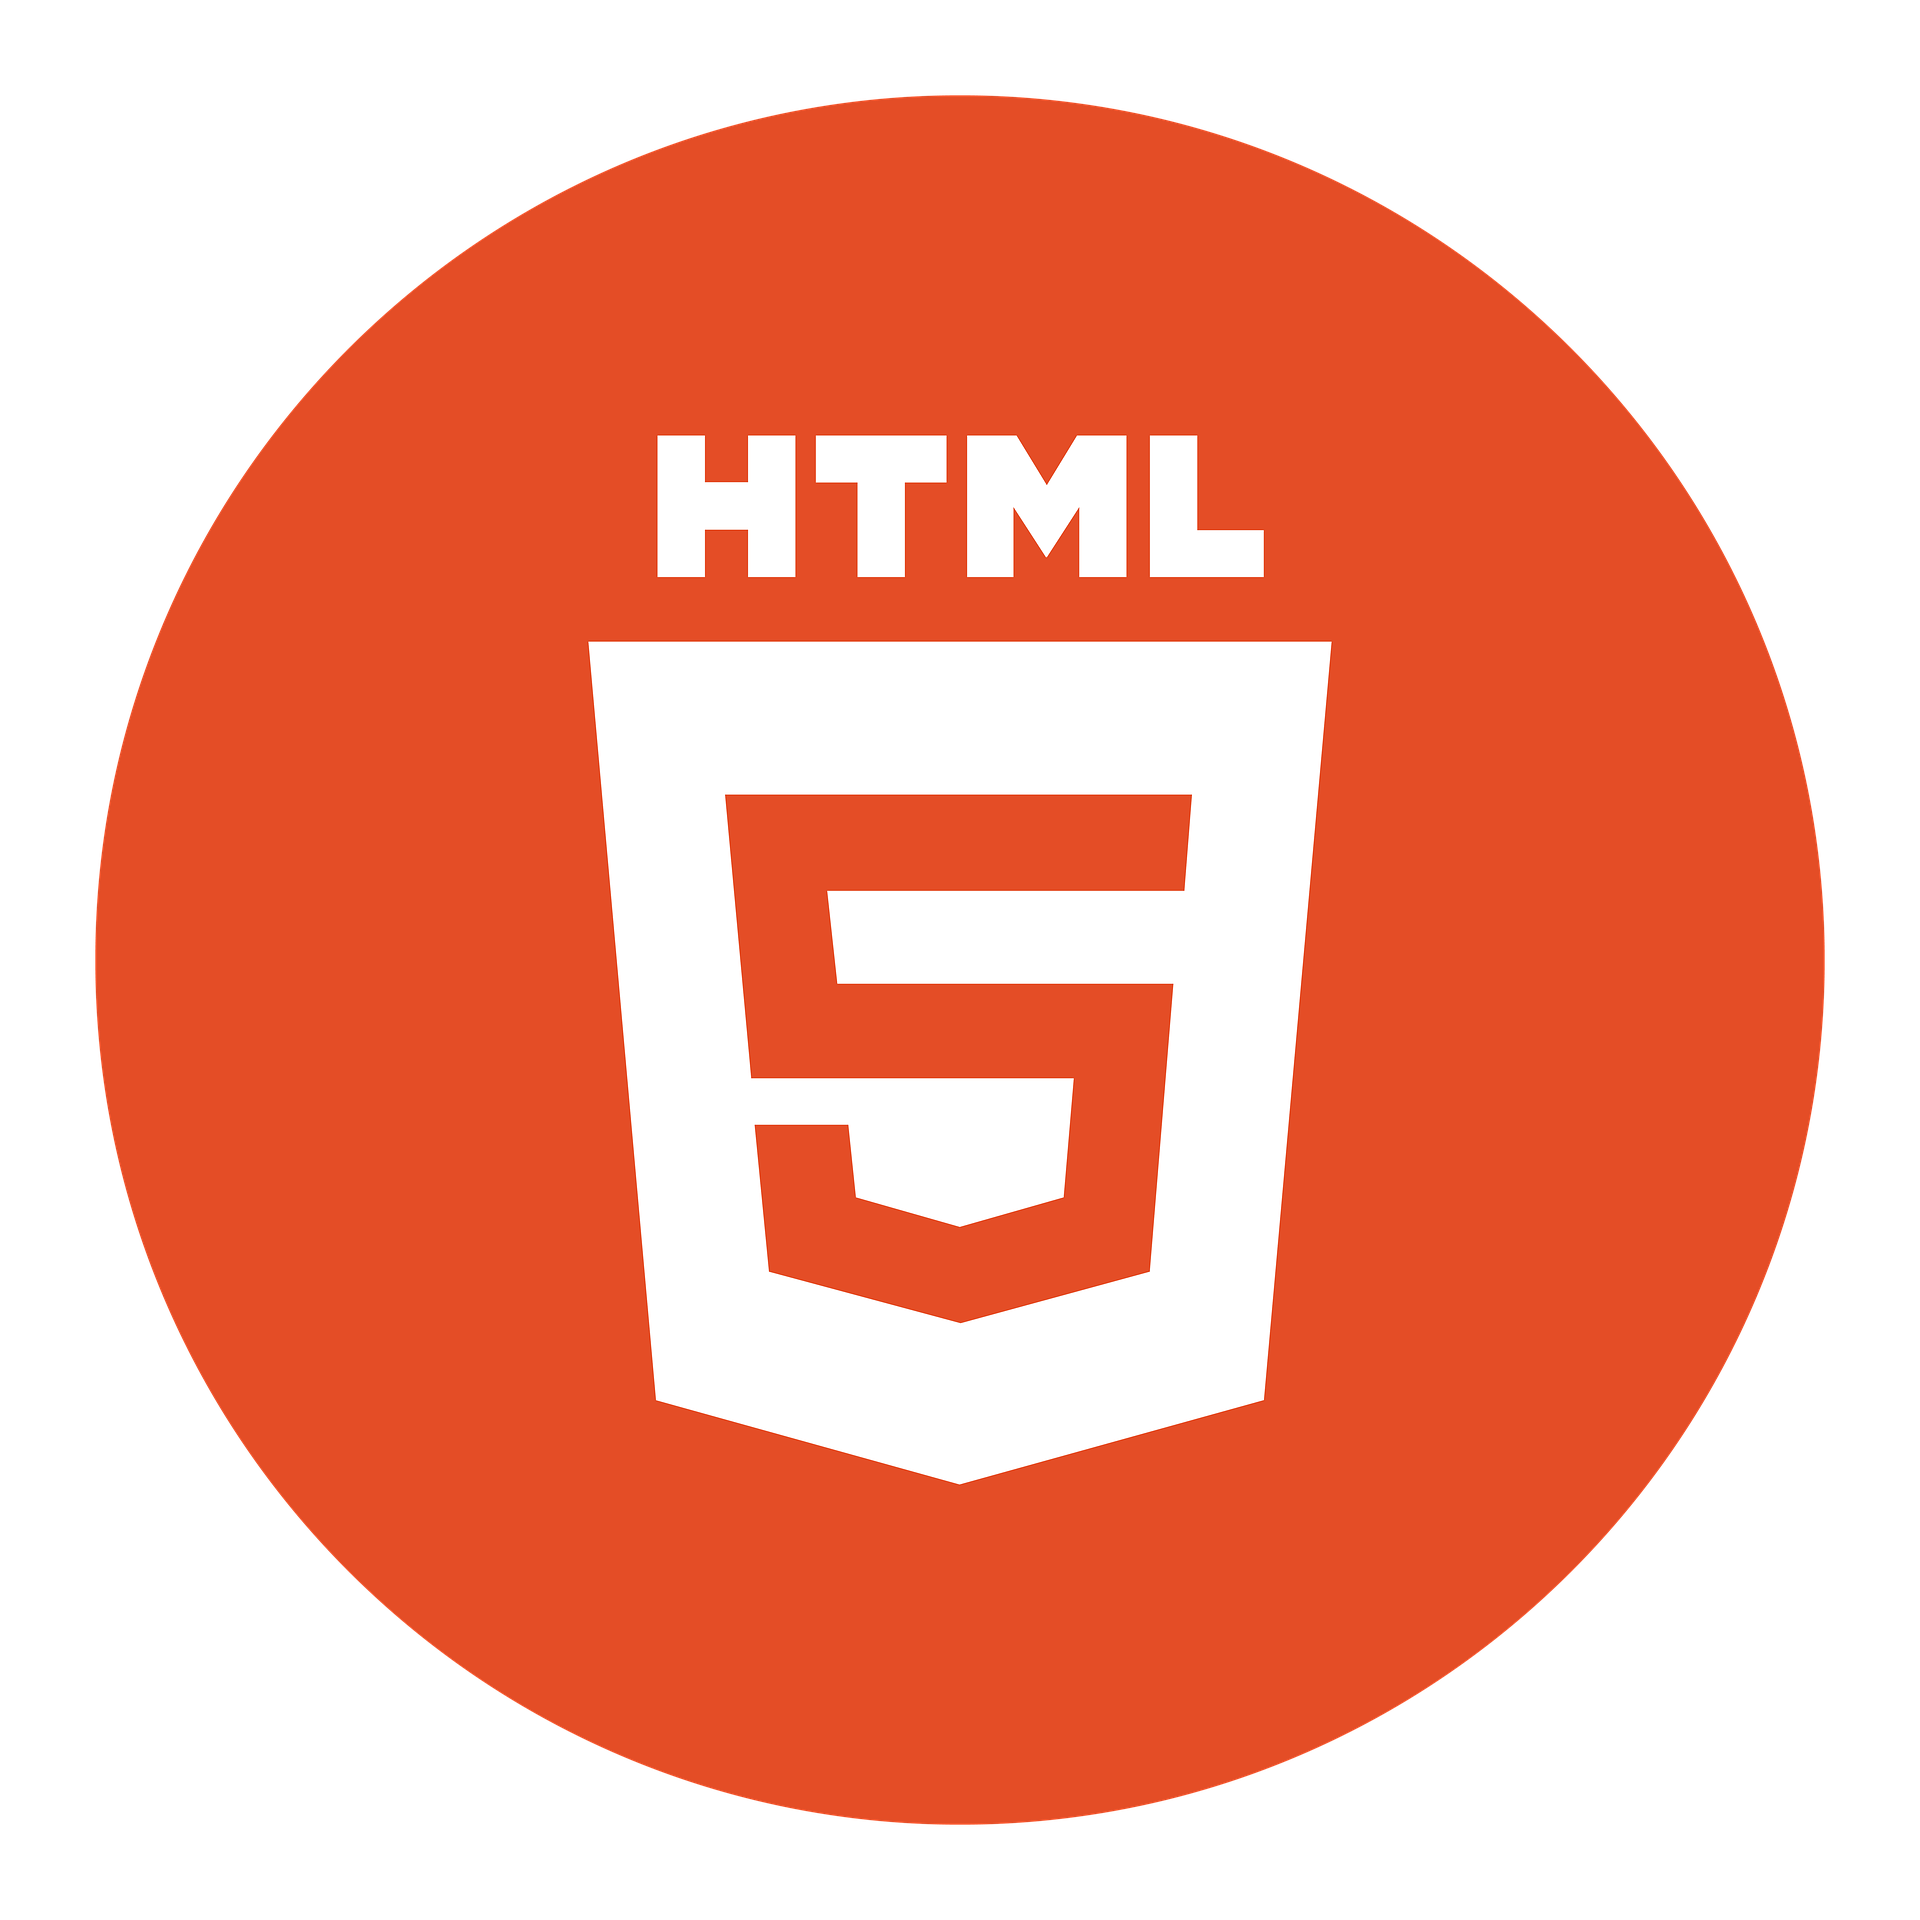 7 Best Tools To Help You Build Your Own html5 Form